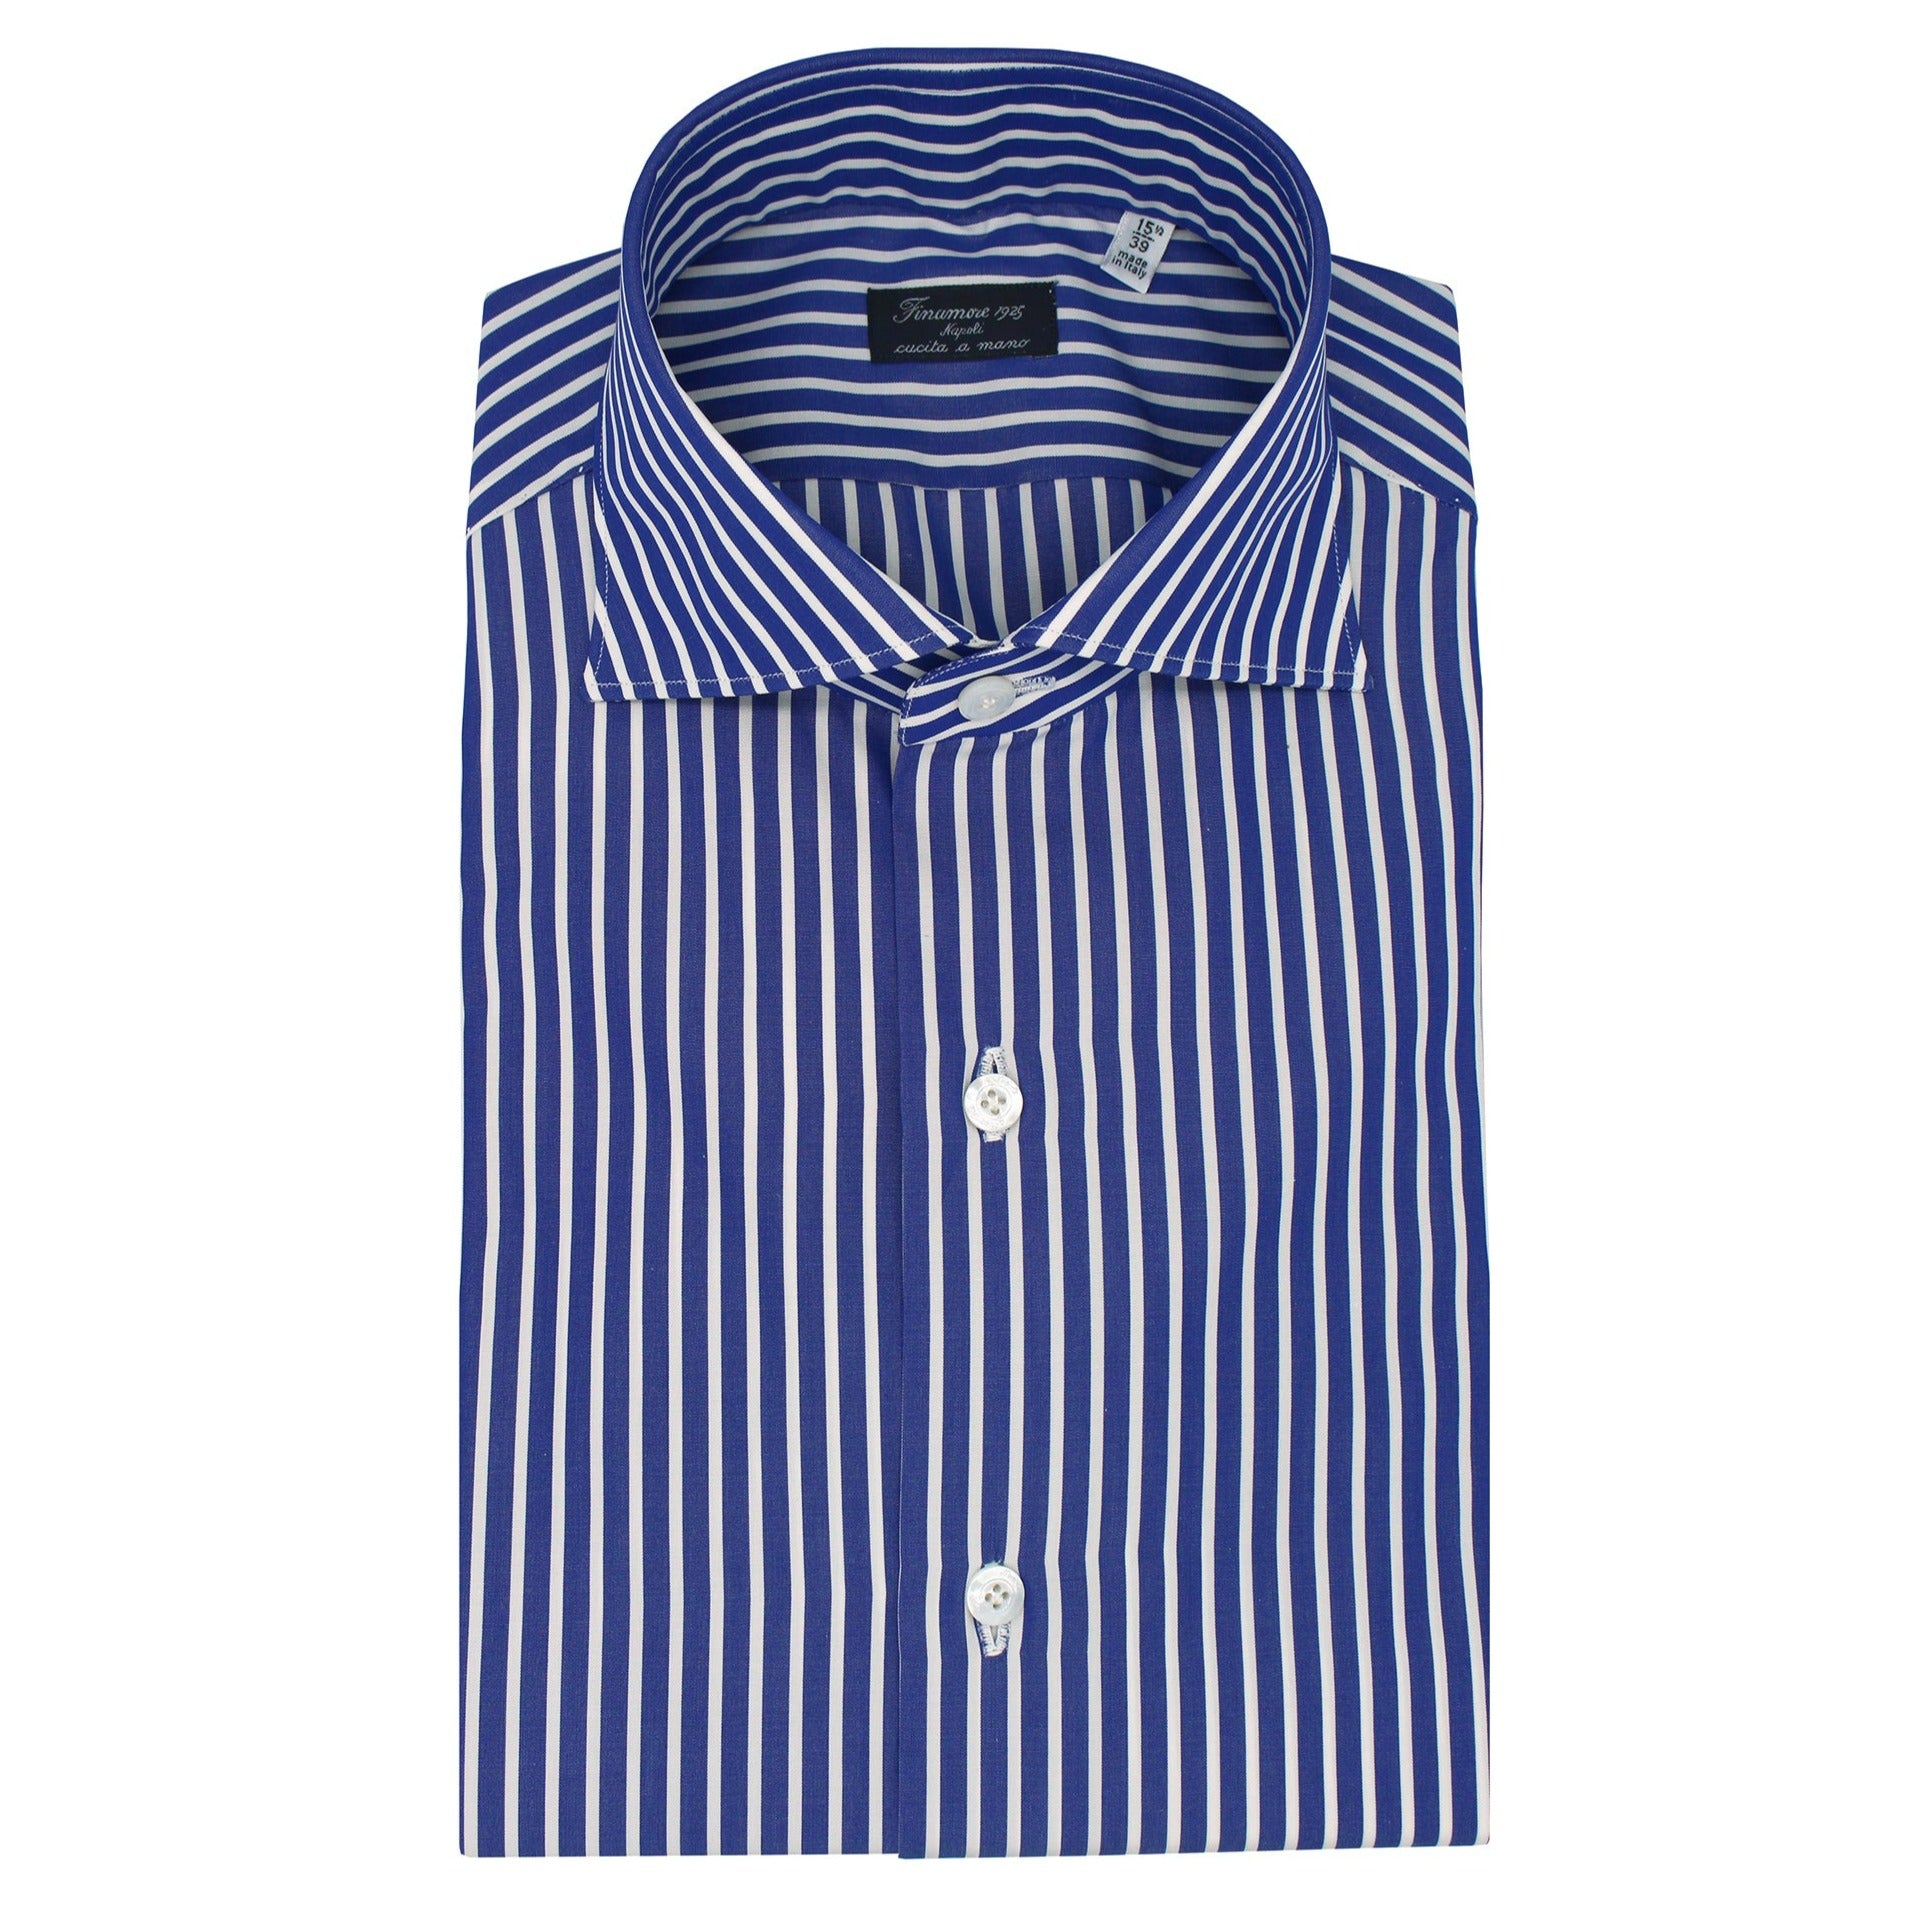 Naples shirt with classic fit in blue wide stripe cotton